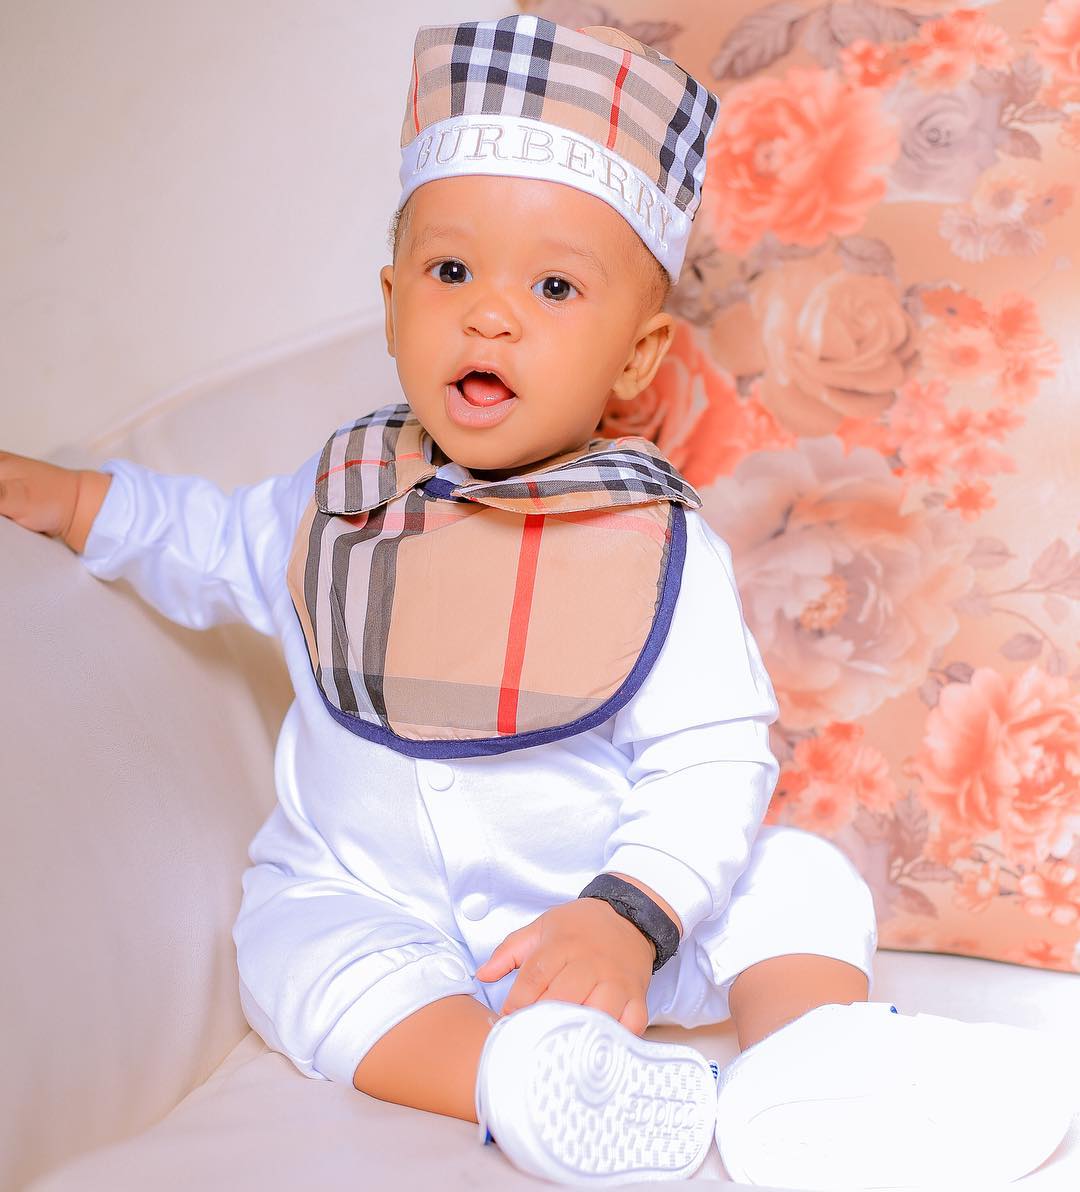 Hamisa Mobetto’s all grown up son now looking more like his mummy in new photos